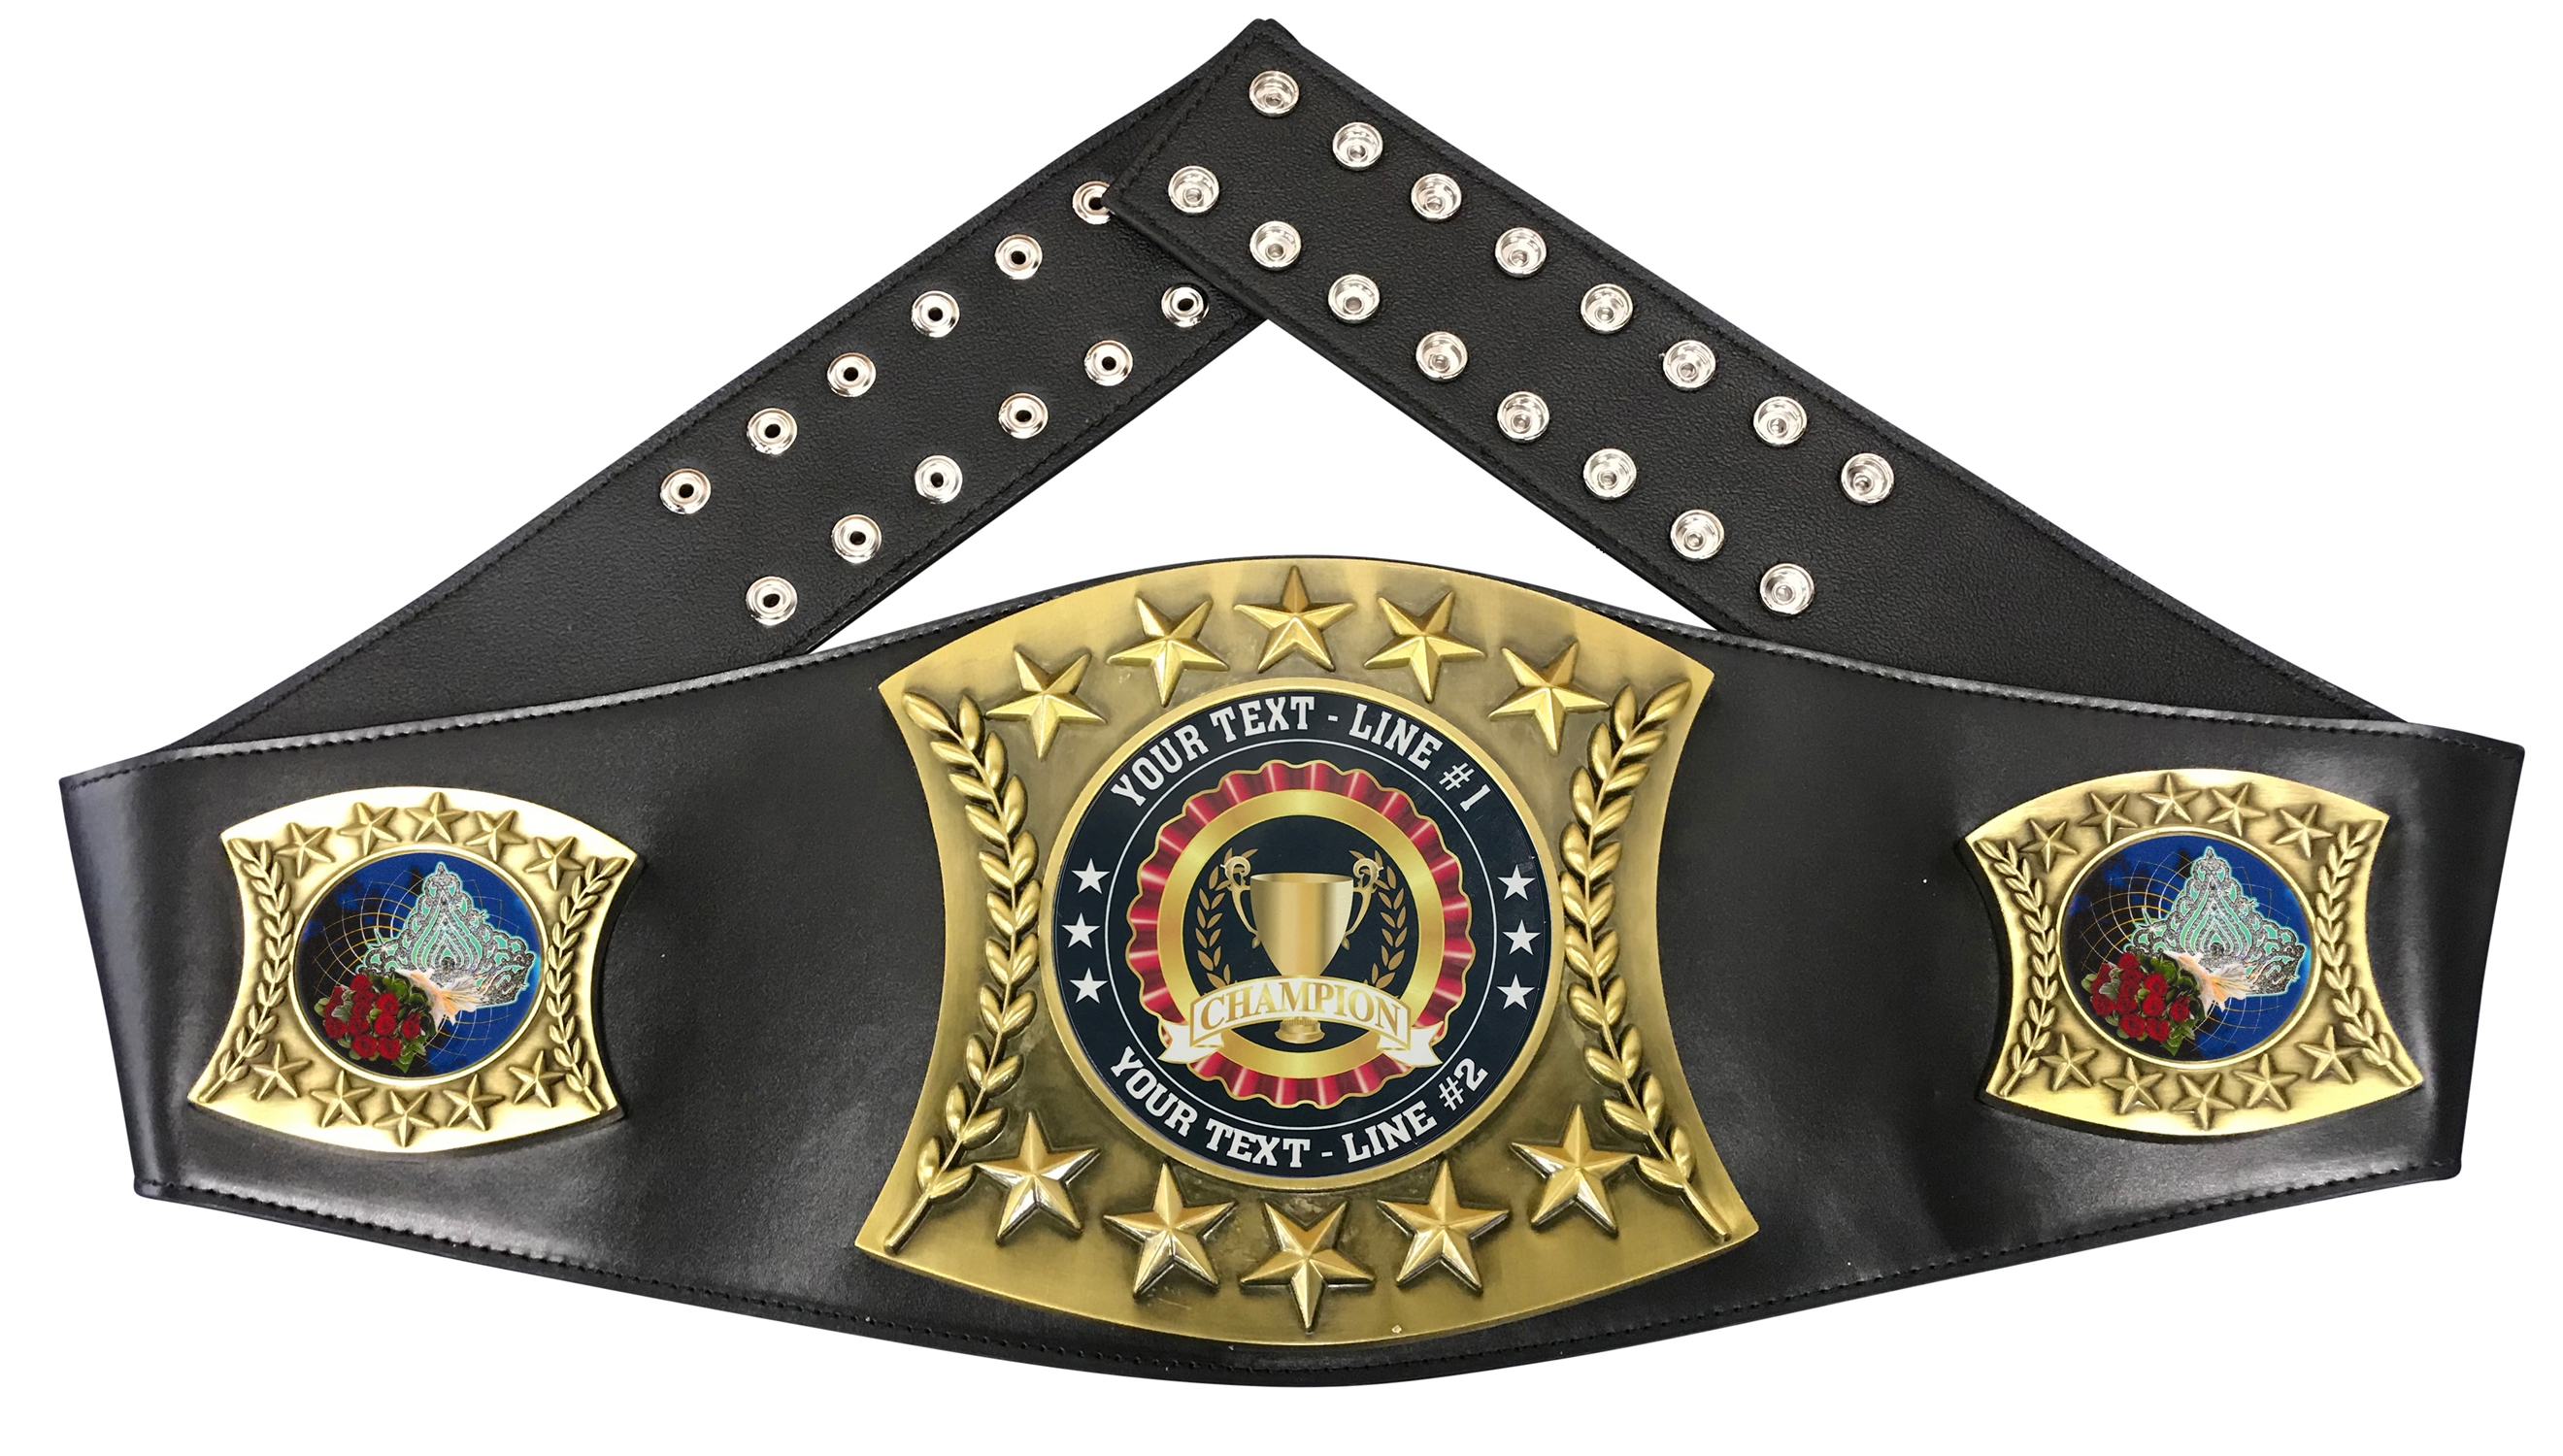 Beauty Queen Personalized Championship Leather Belt